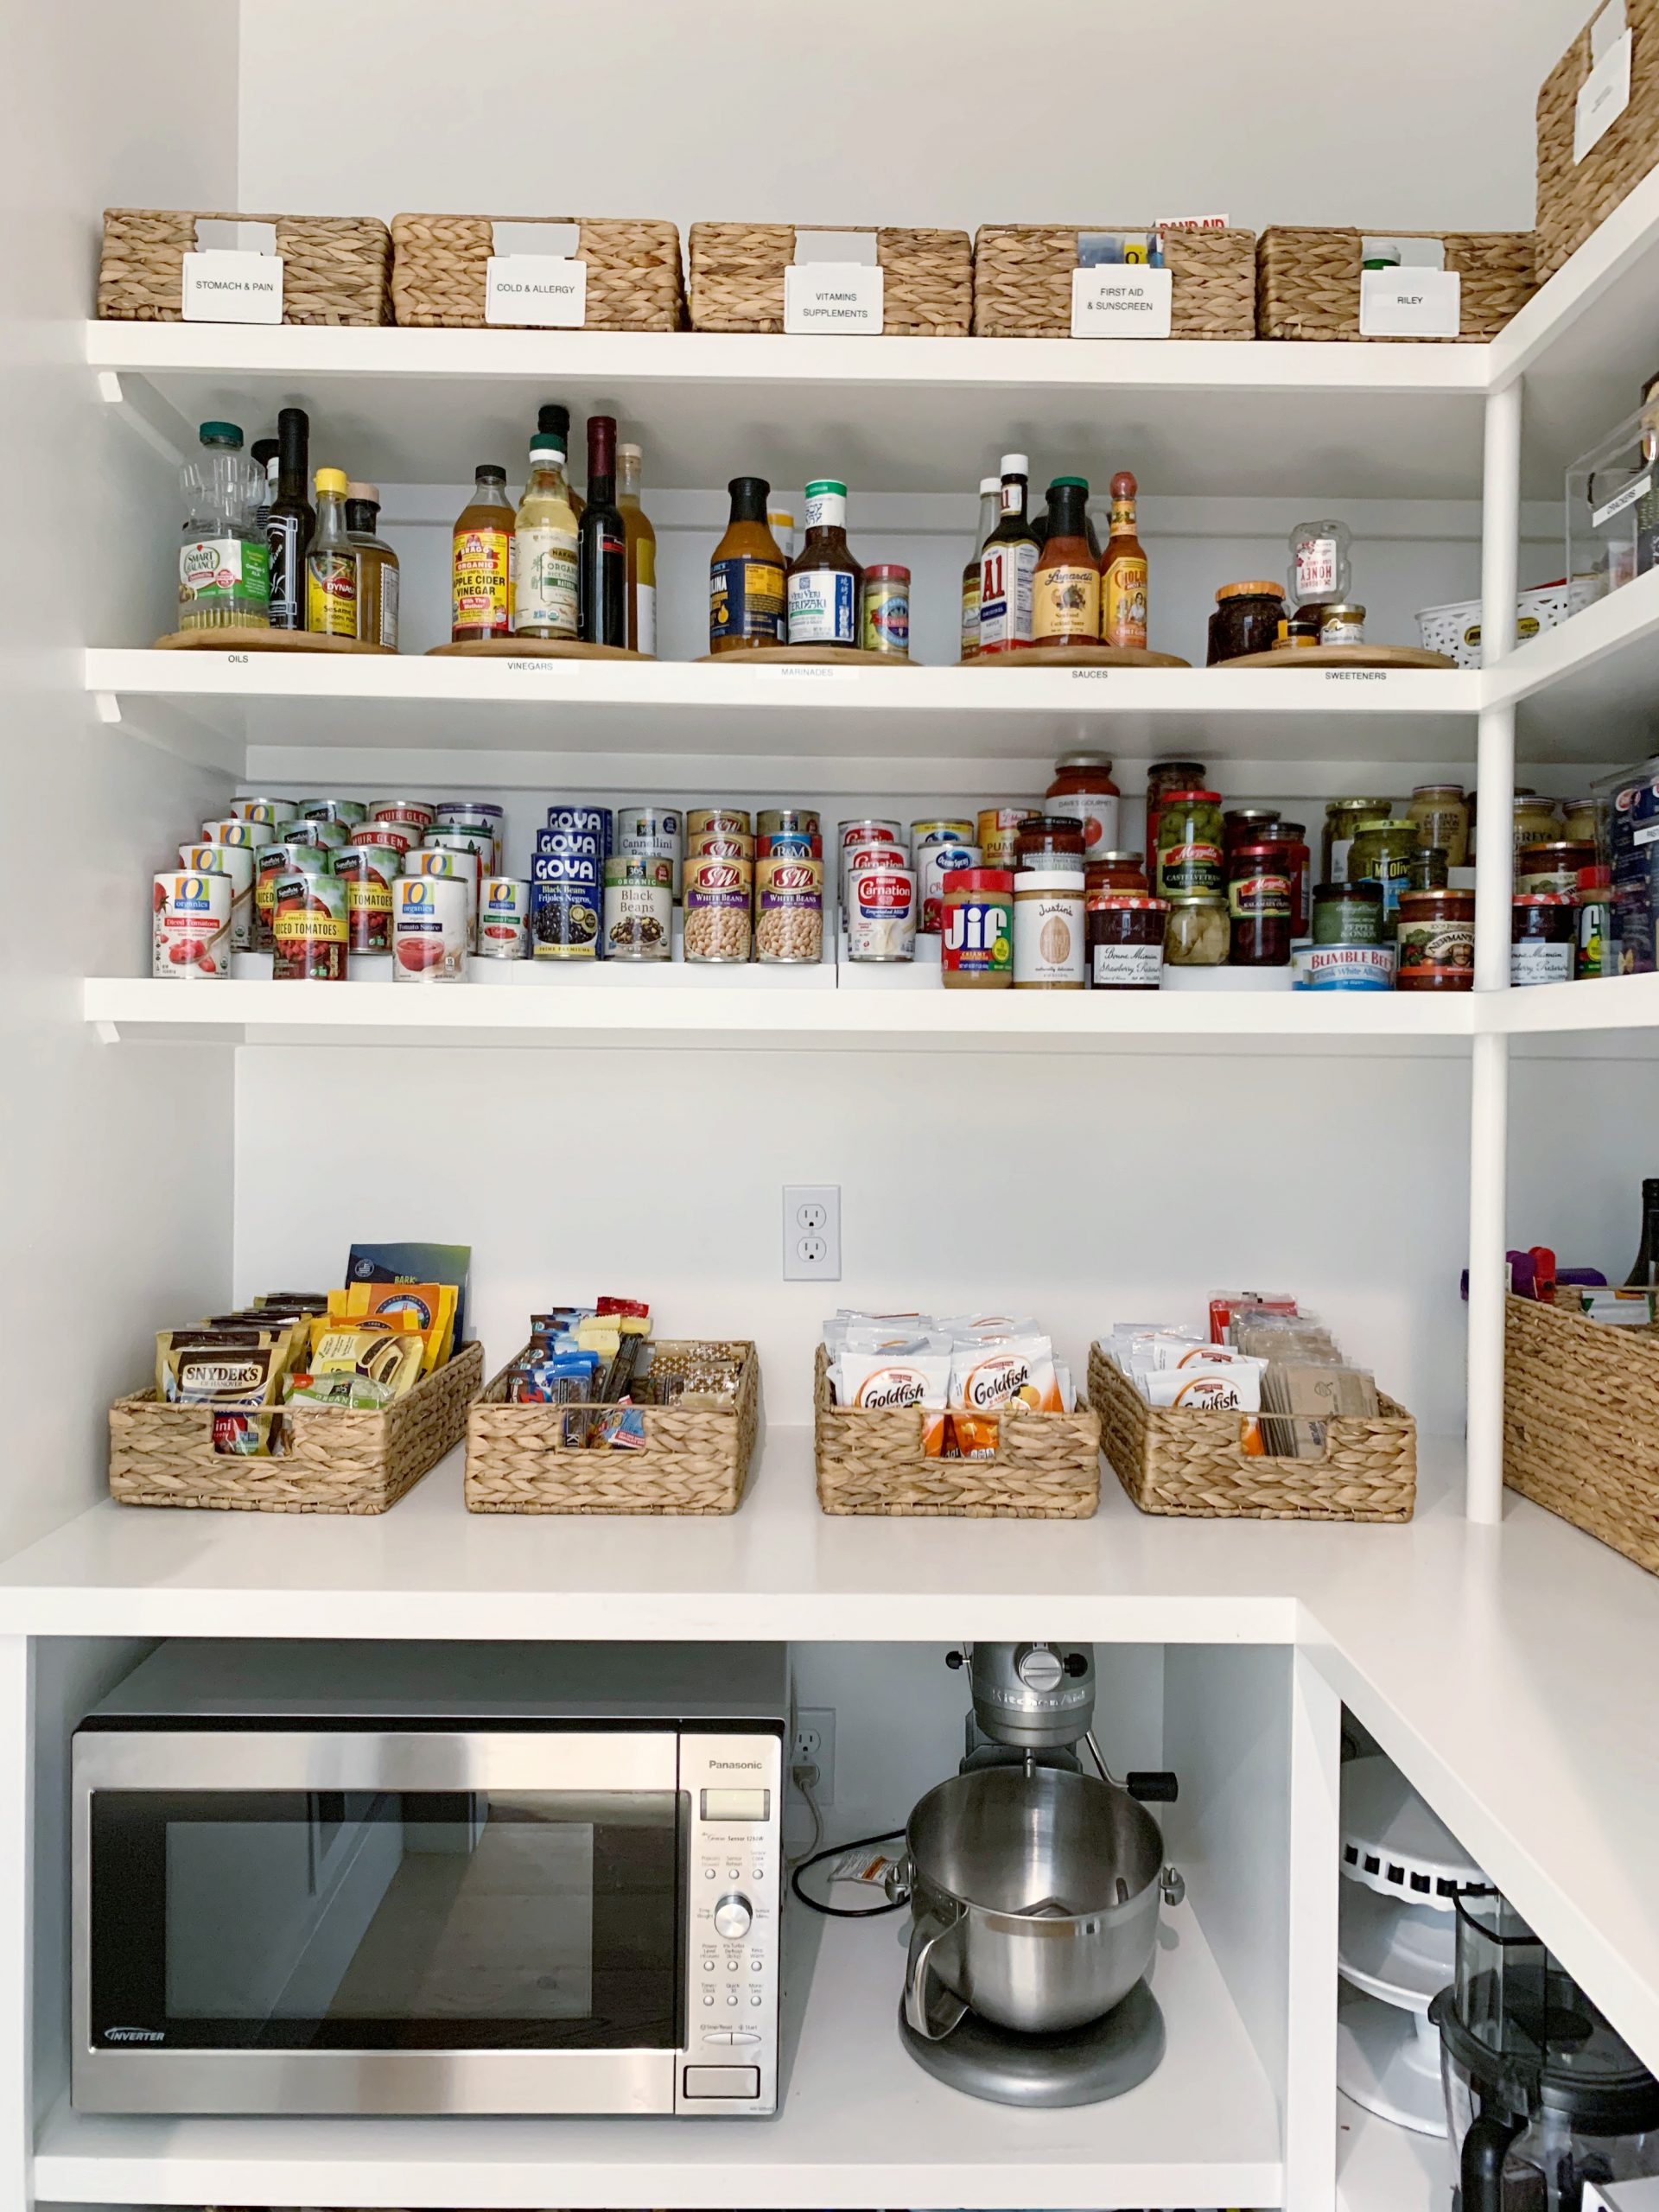 https://simplyorganized.me/wp-content/uploads/2020/02/pretty-white-walk-in-pantry-scaled.jpg